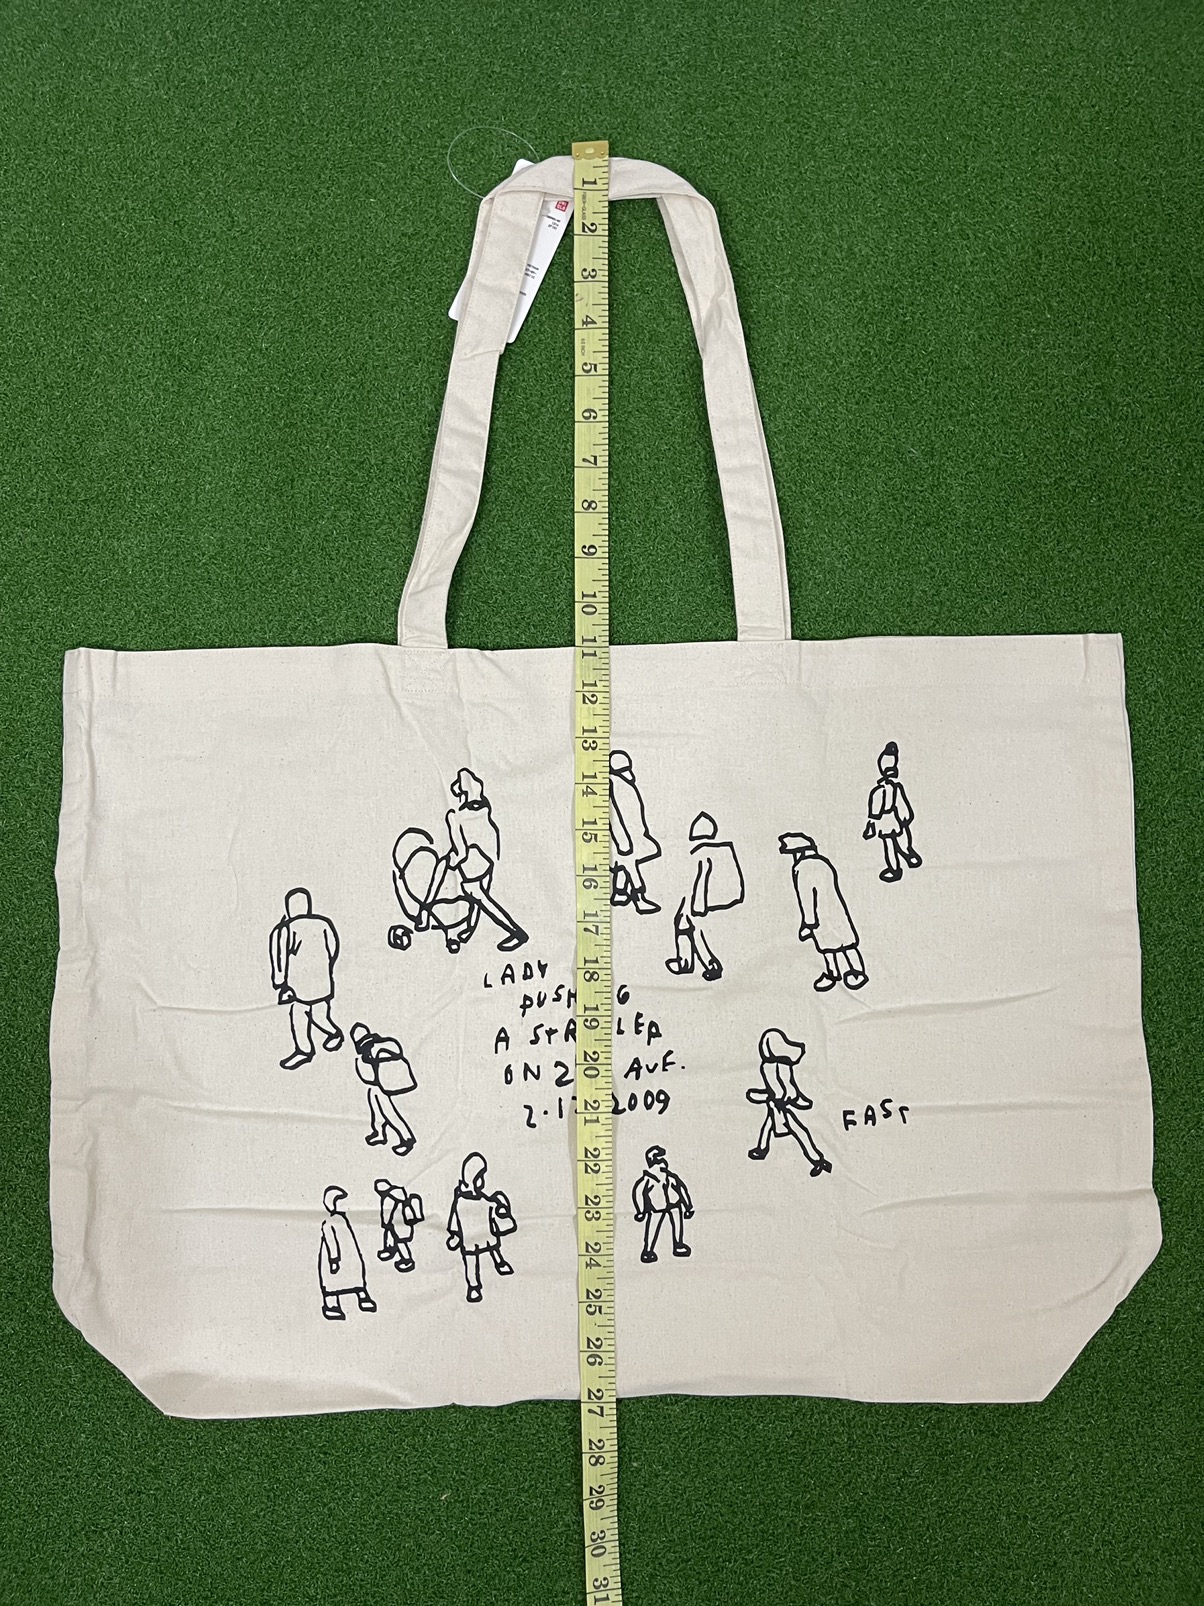 Outdoor Style Go Out! - New Jason Polan Tote Bag Limited Edition / Uniqlo / Eva - 14